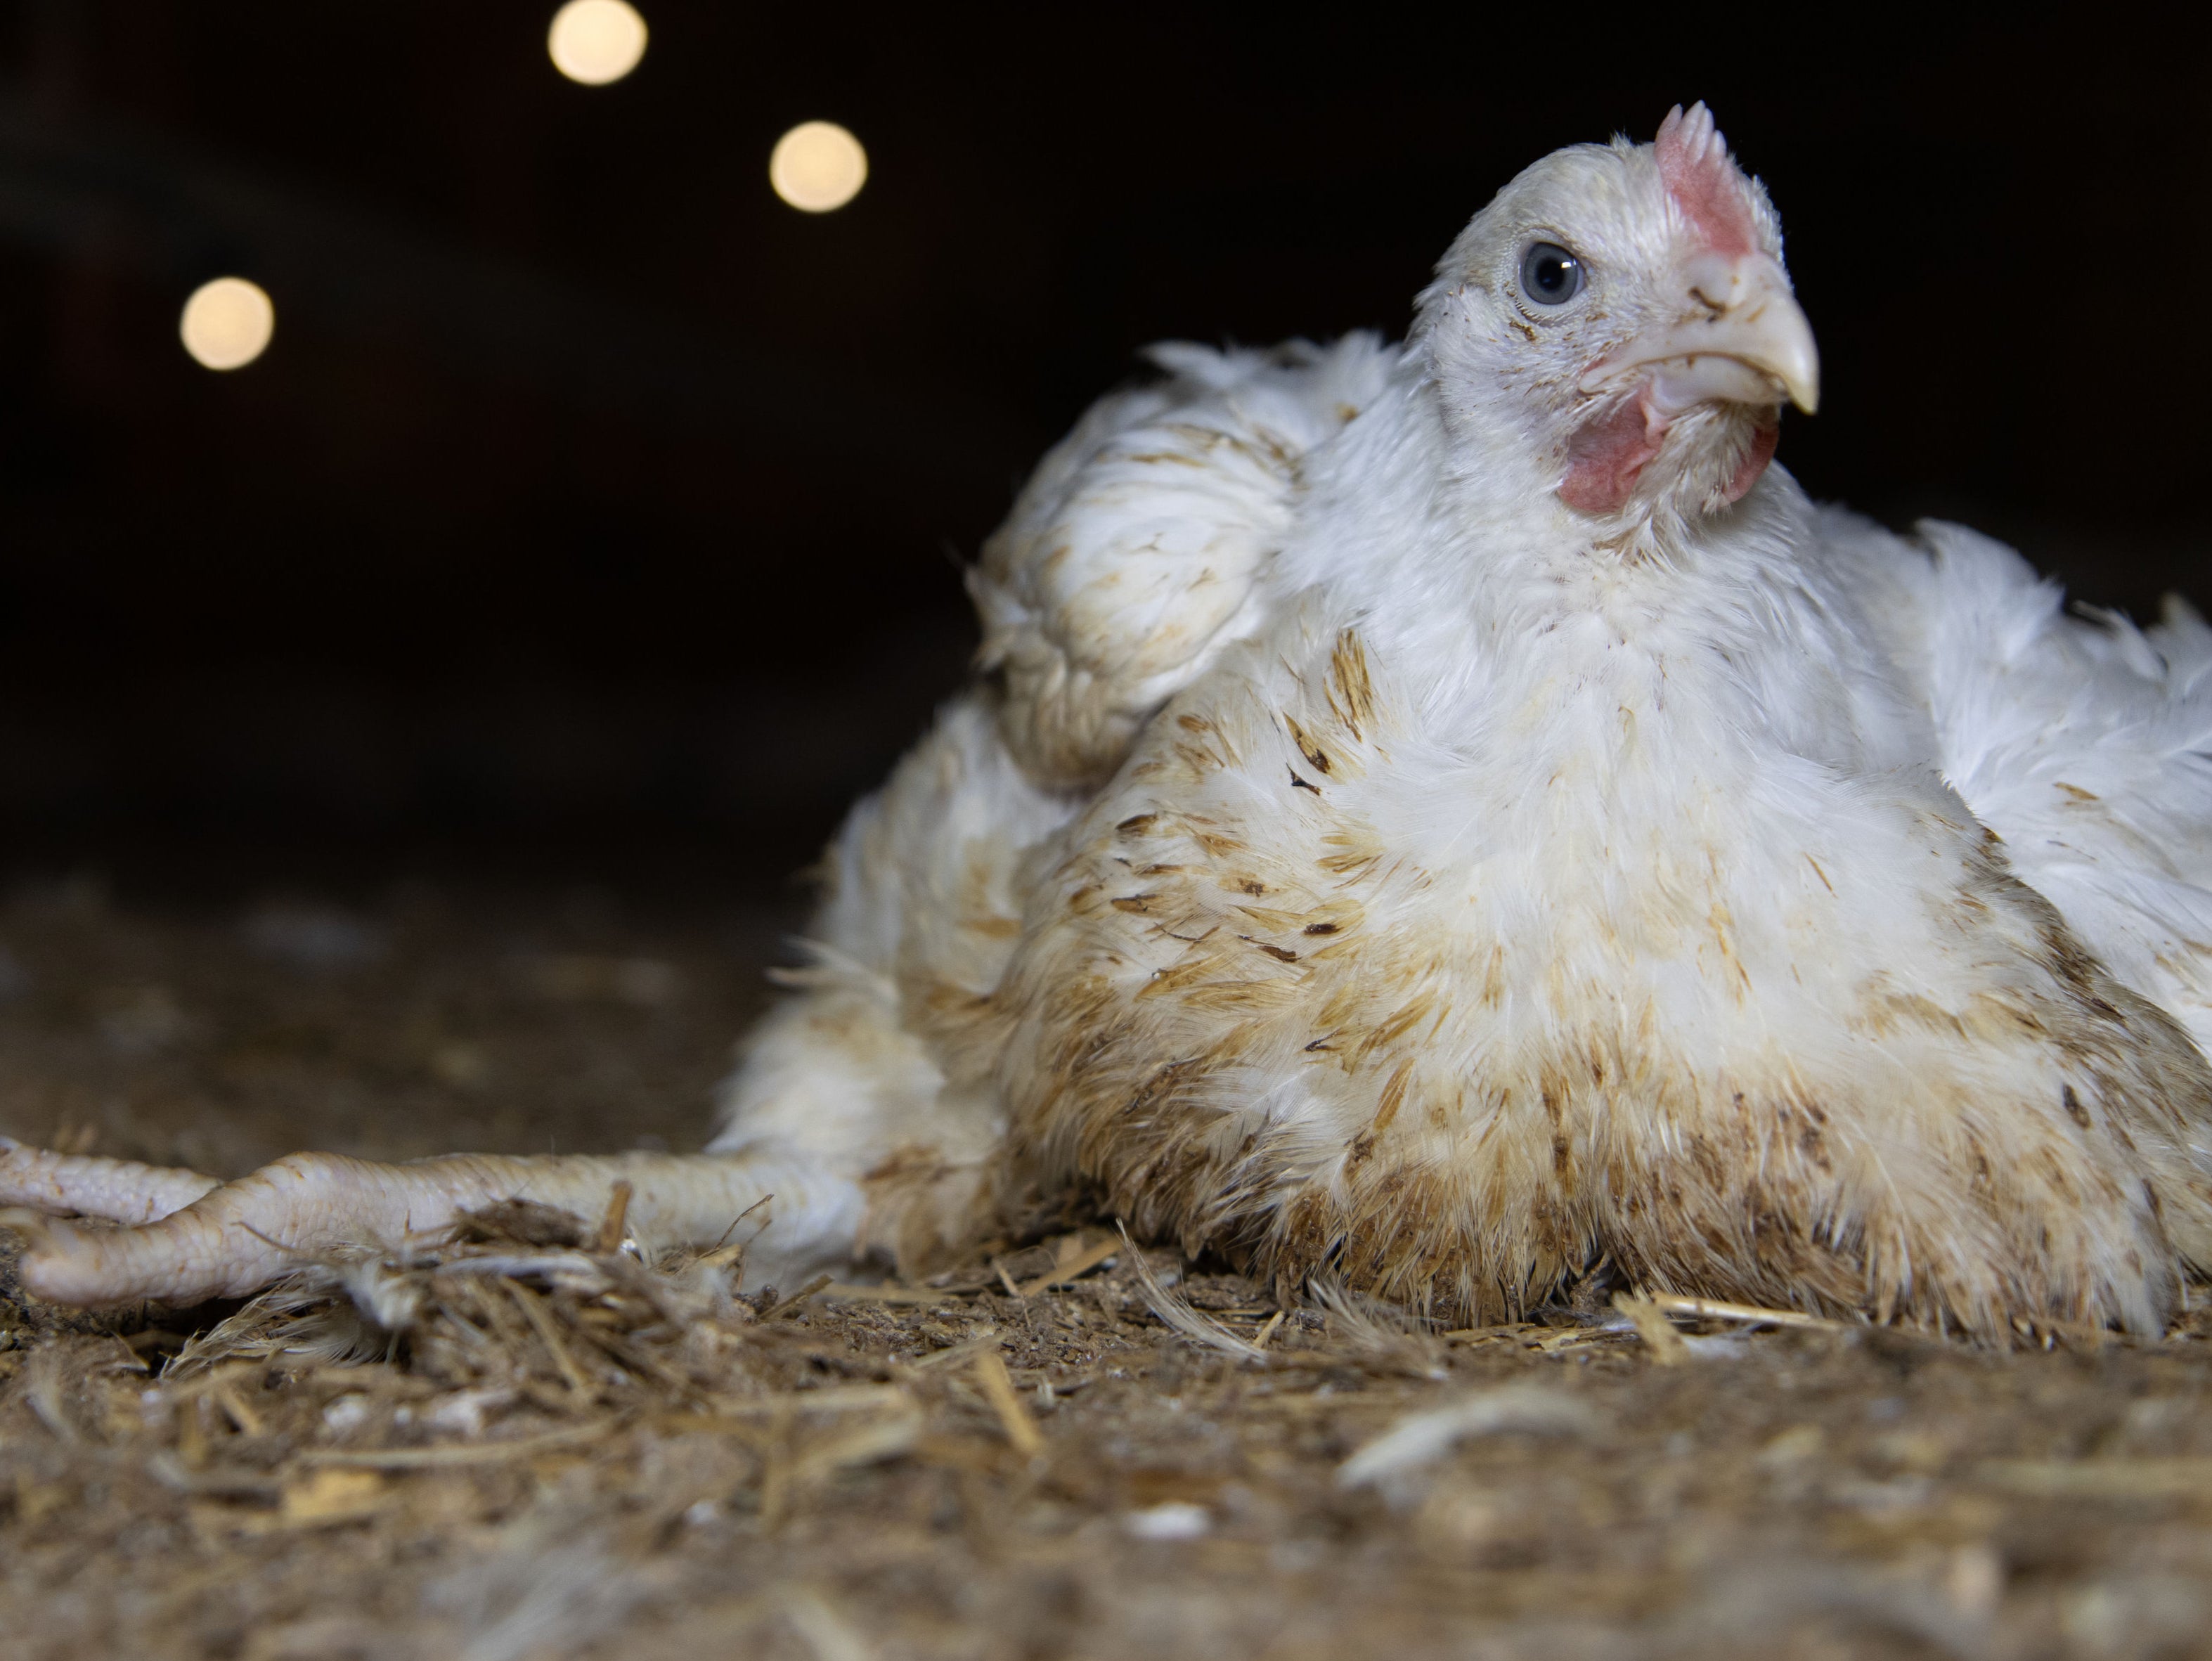 Chickens could not support themselves and were forced to lie in their own waste, activists say